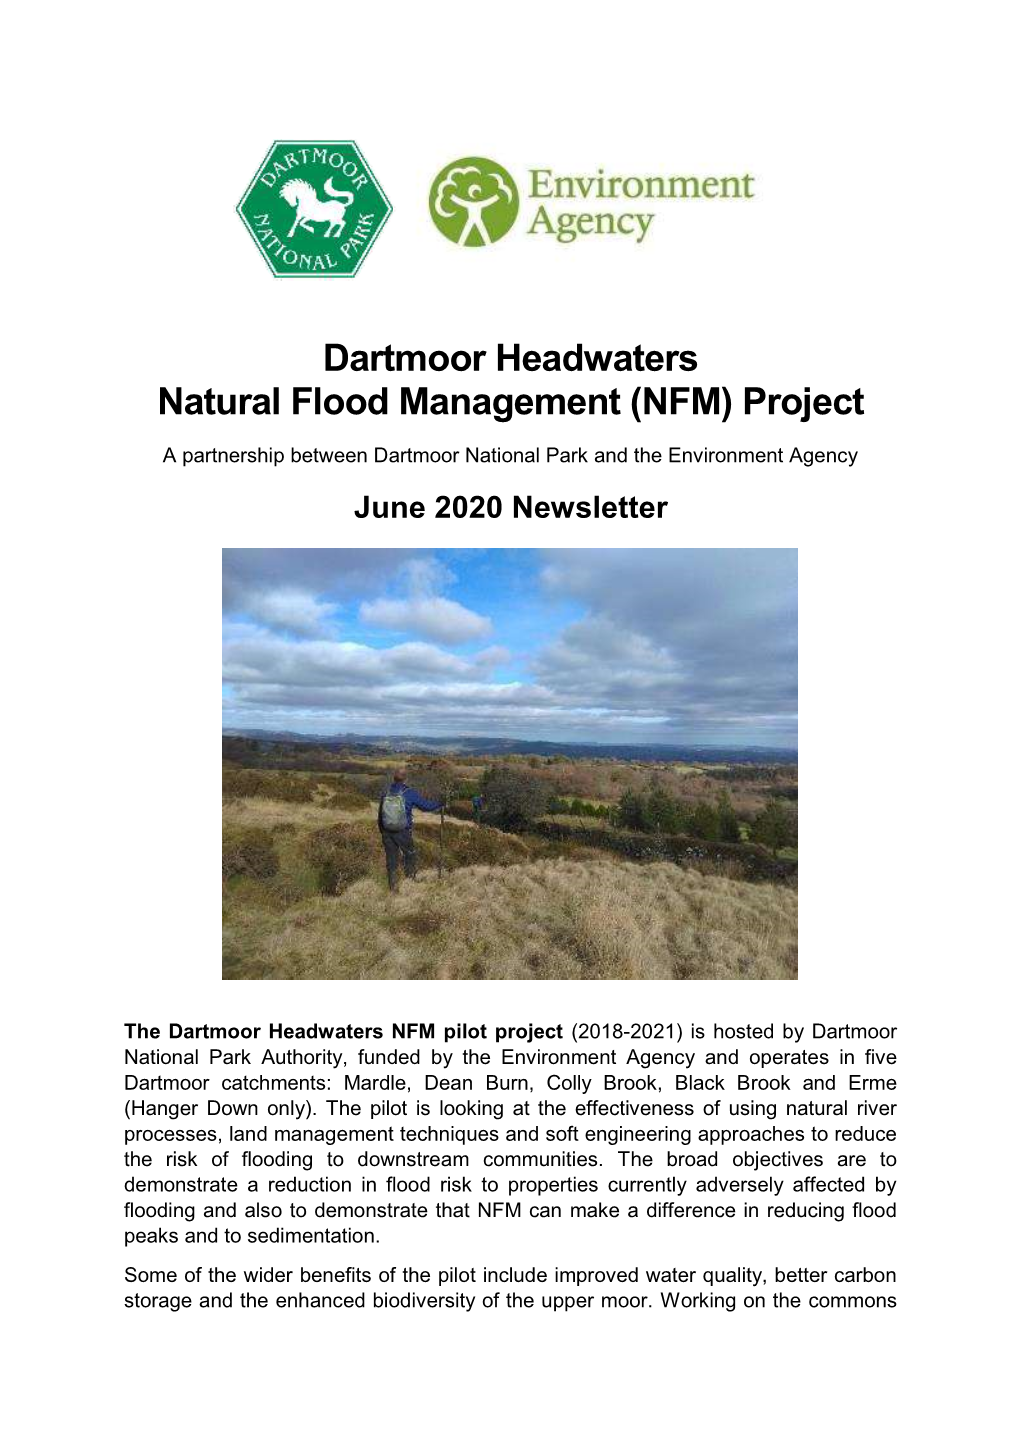 Dartmoor Headwaters Natural Flood Management (NFM) Project